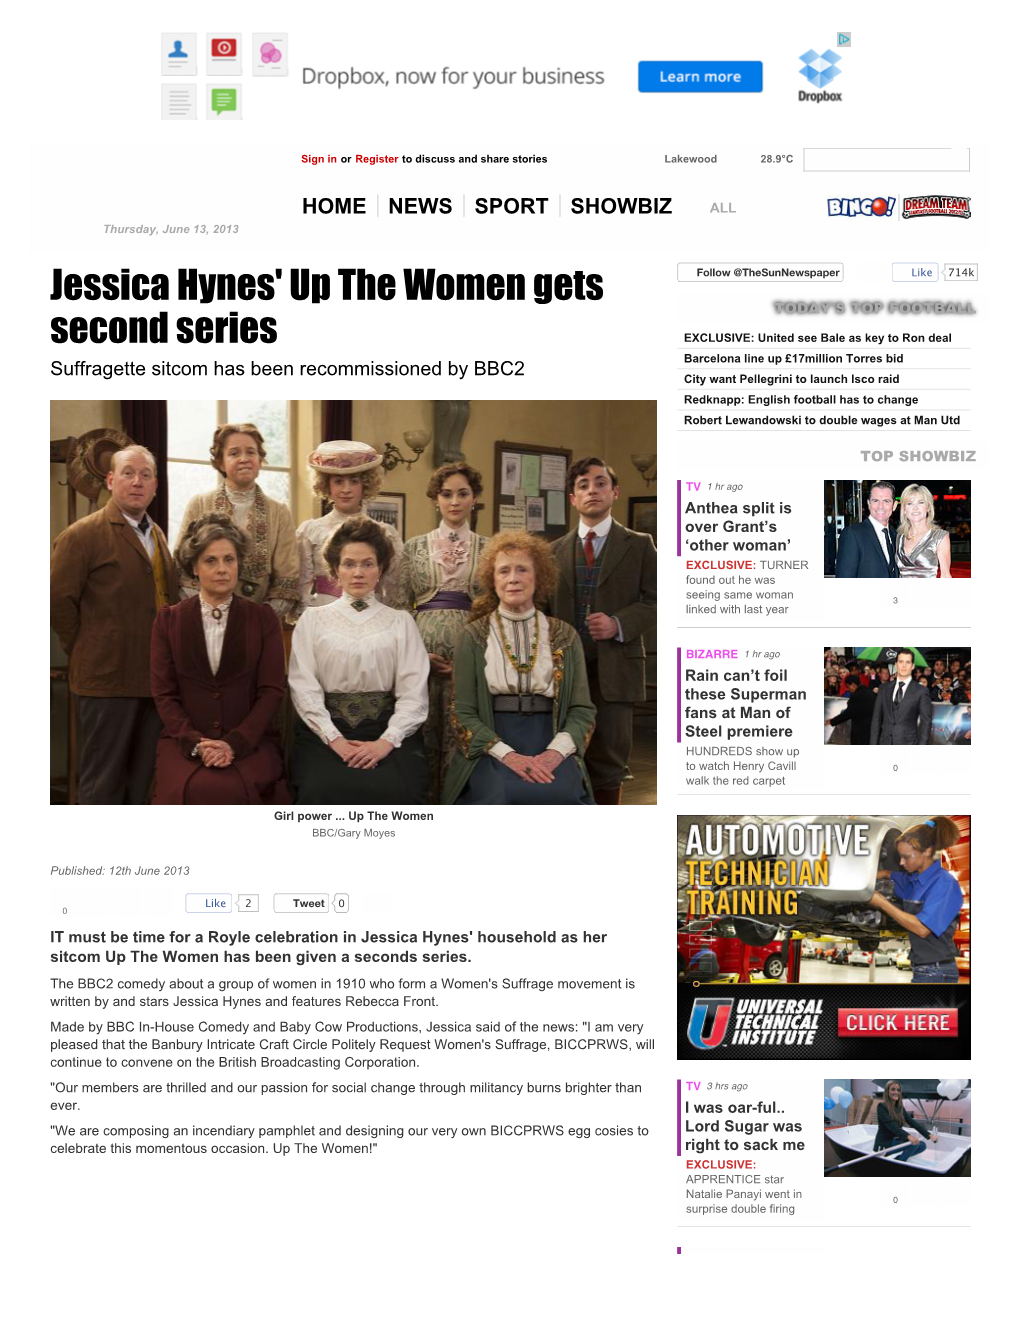 Jessica Hynes' up the Women Gets Second Series | the Sun |TV